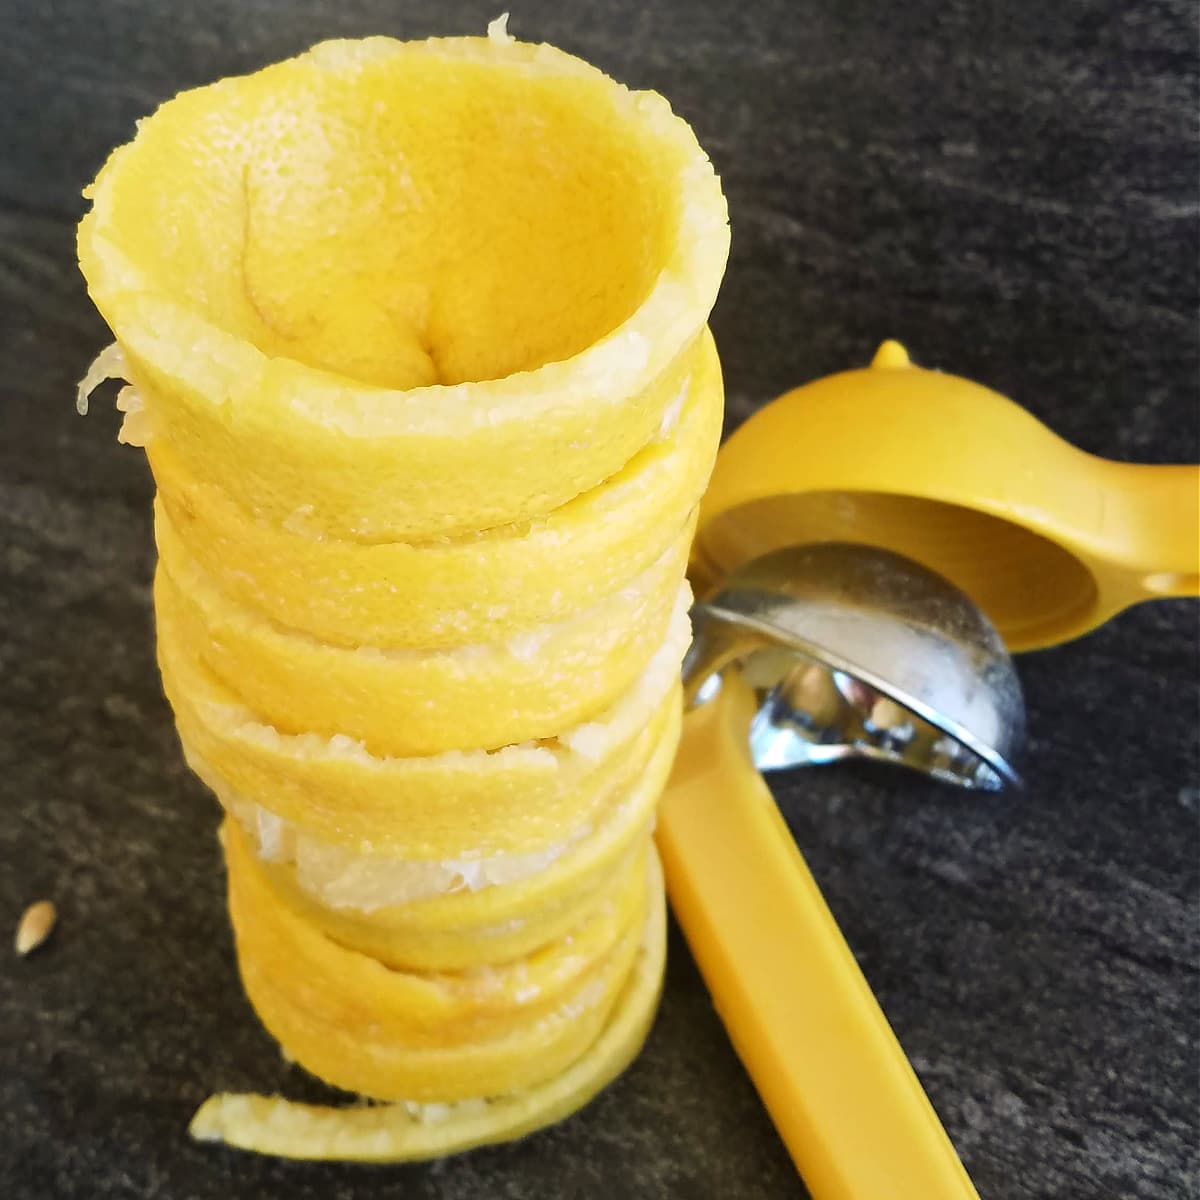 Stack of empty lemon rinds next to a lemon squeezer.